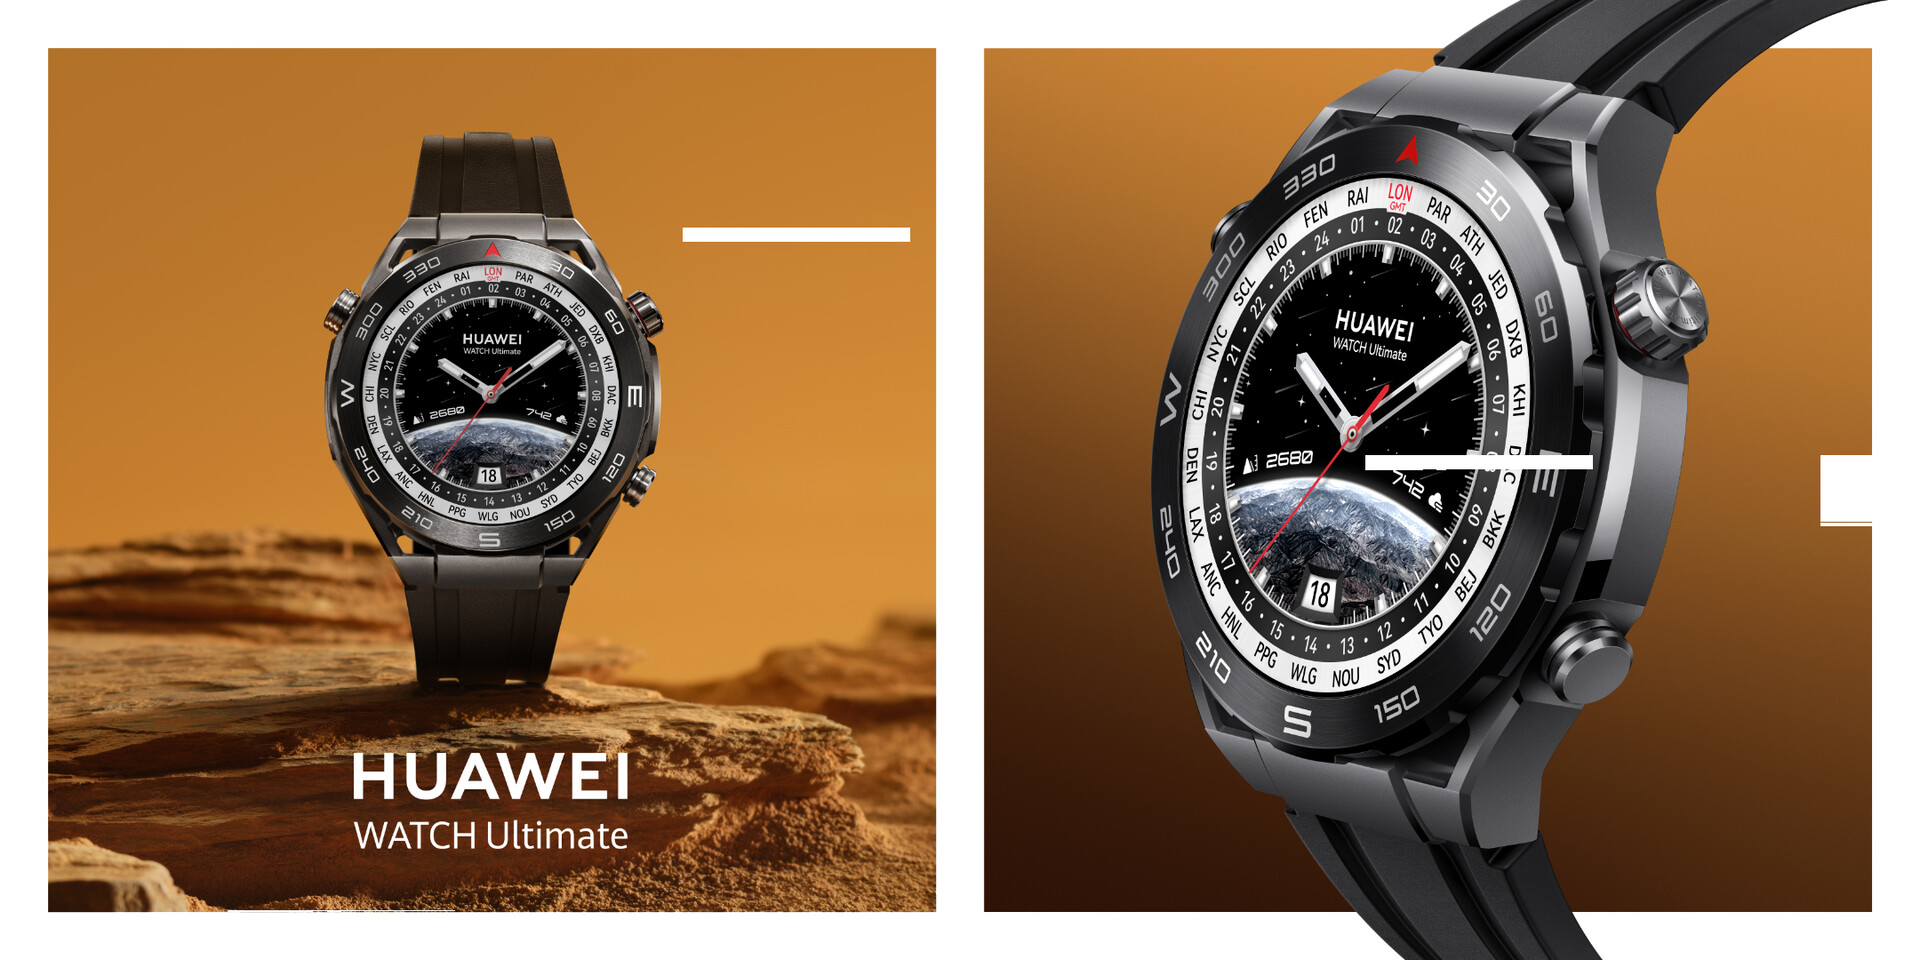 Huawei Watch Ultimate debuted in Europe without a satellite link, but with a gift